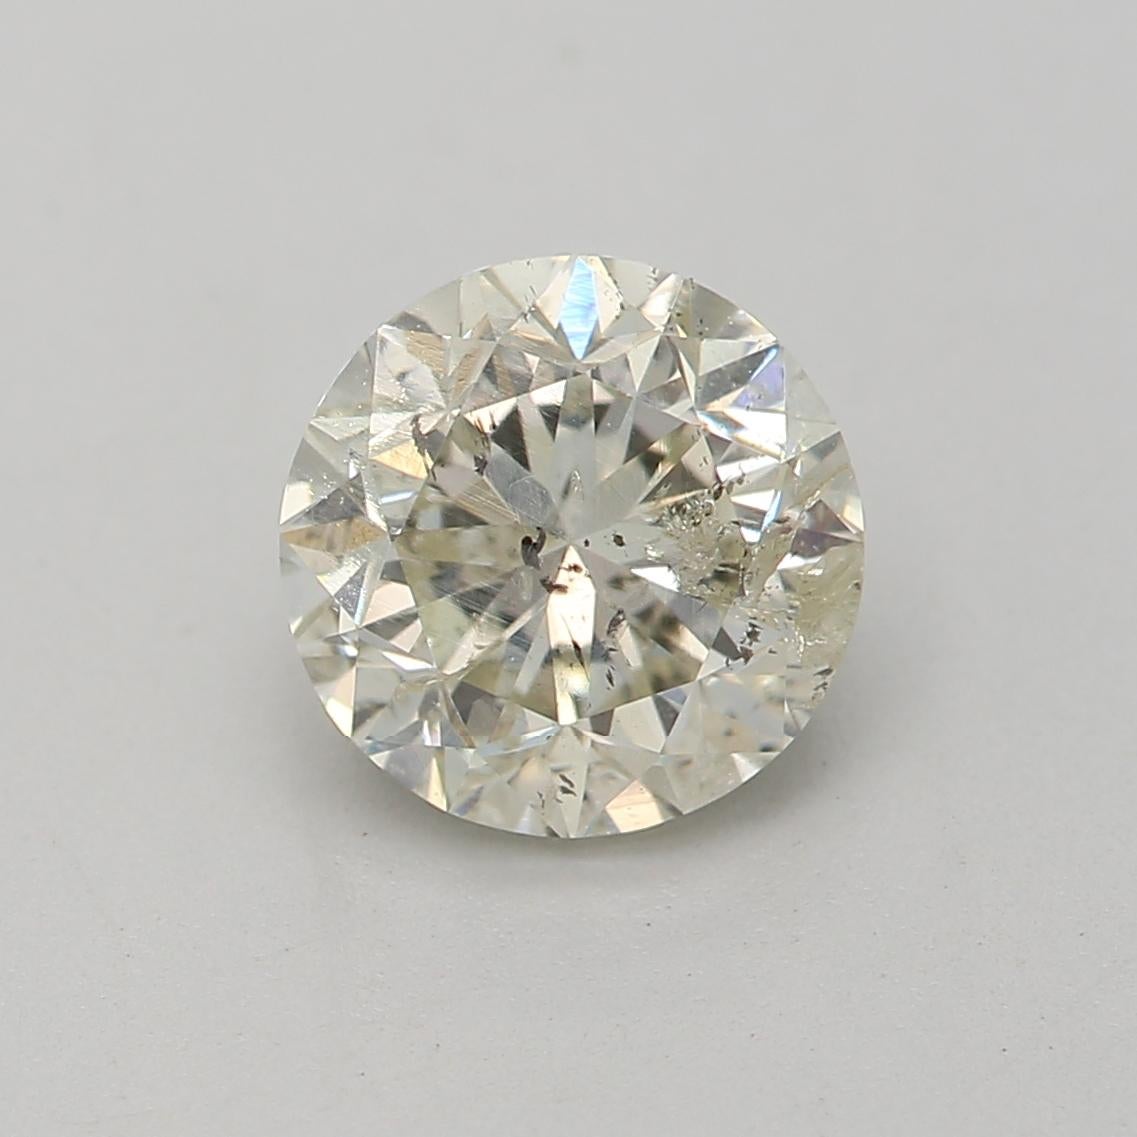 Round Cut 0.94 Carat Round cut diamond I2 Clarity GIA Certified For Sale